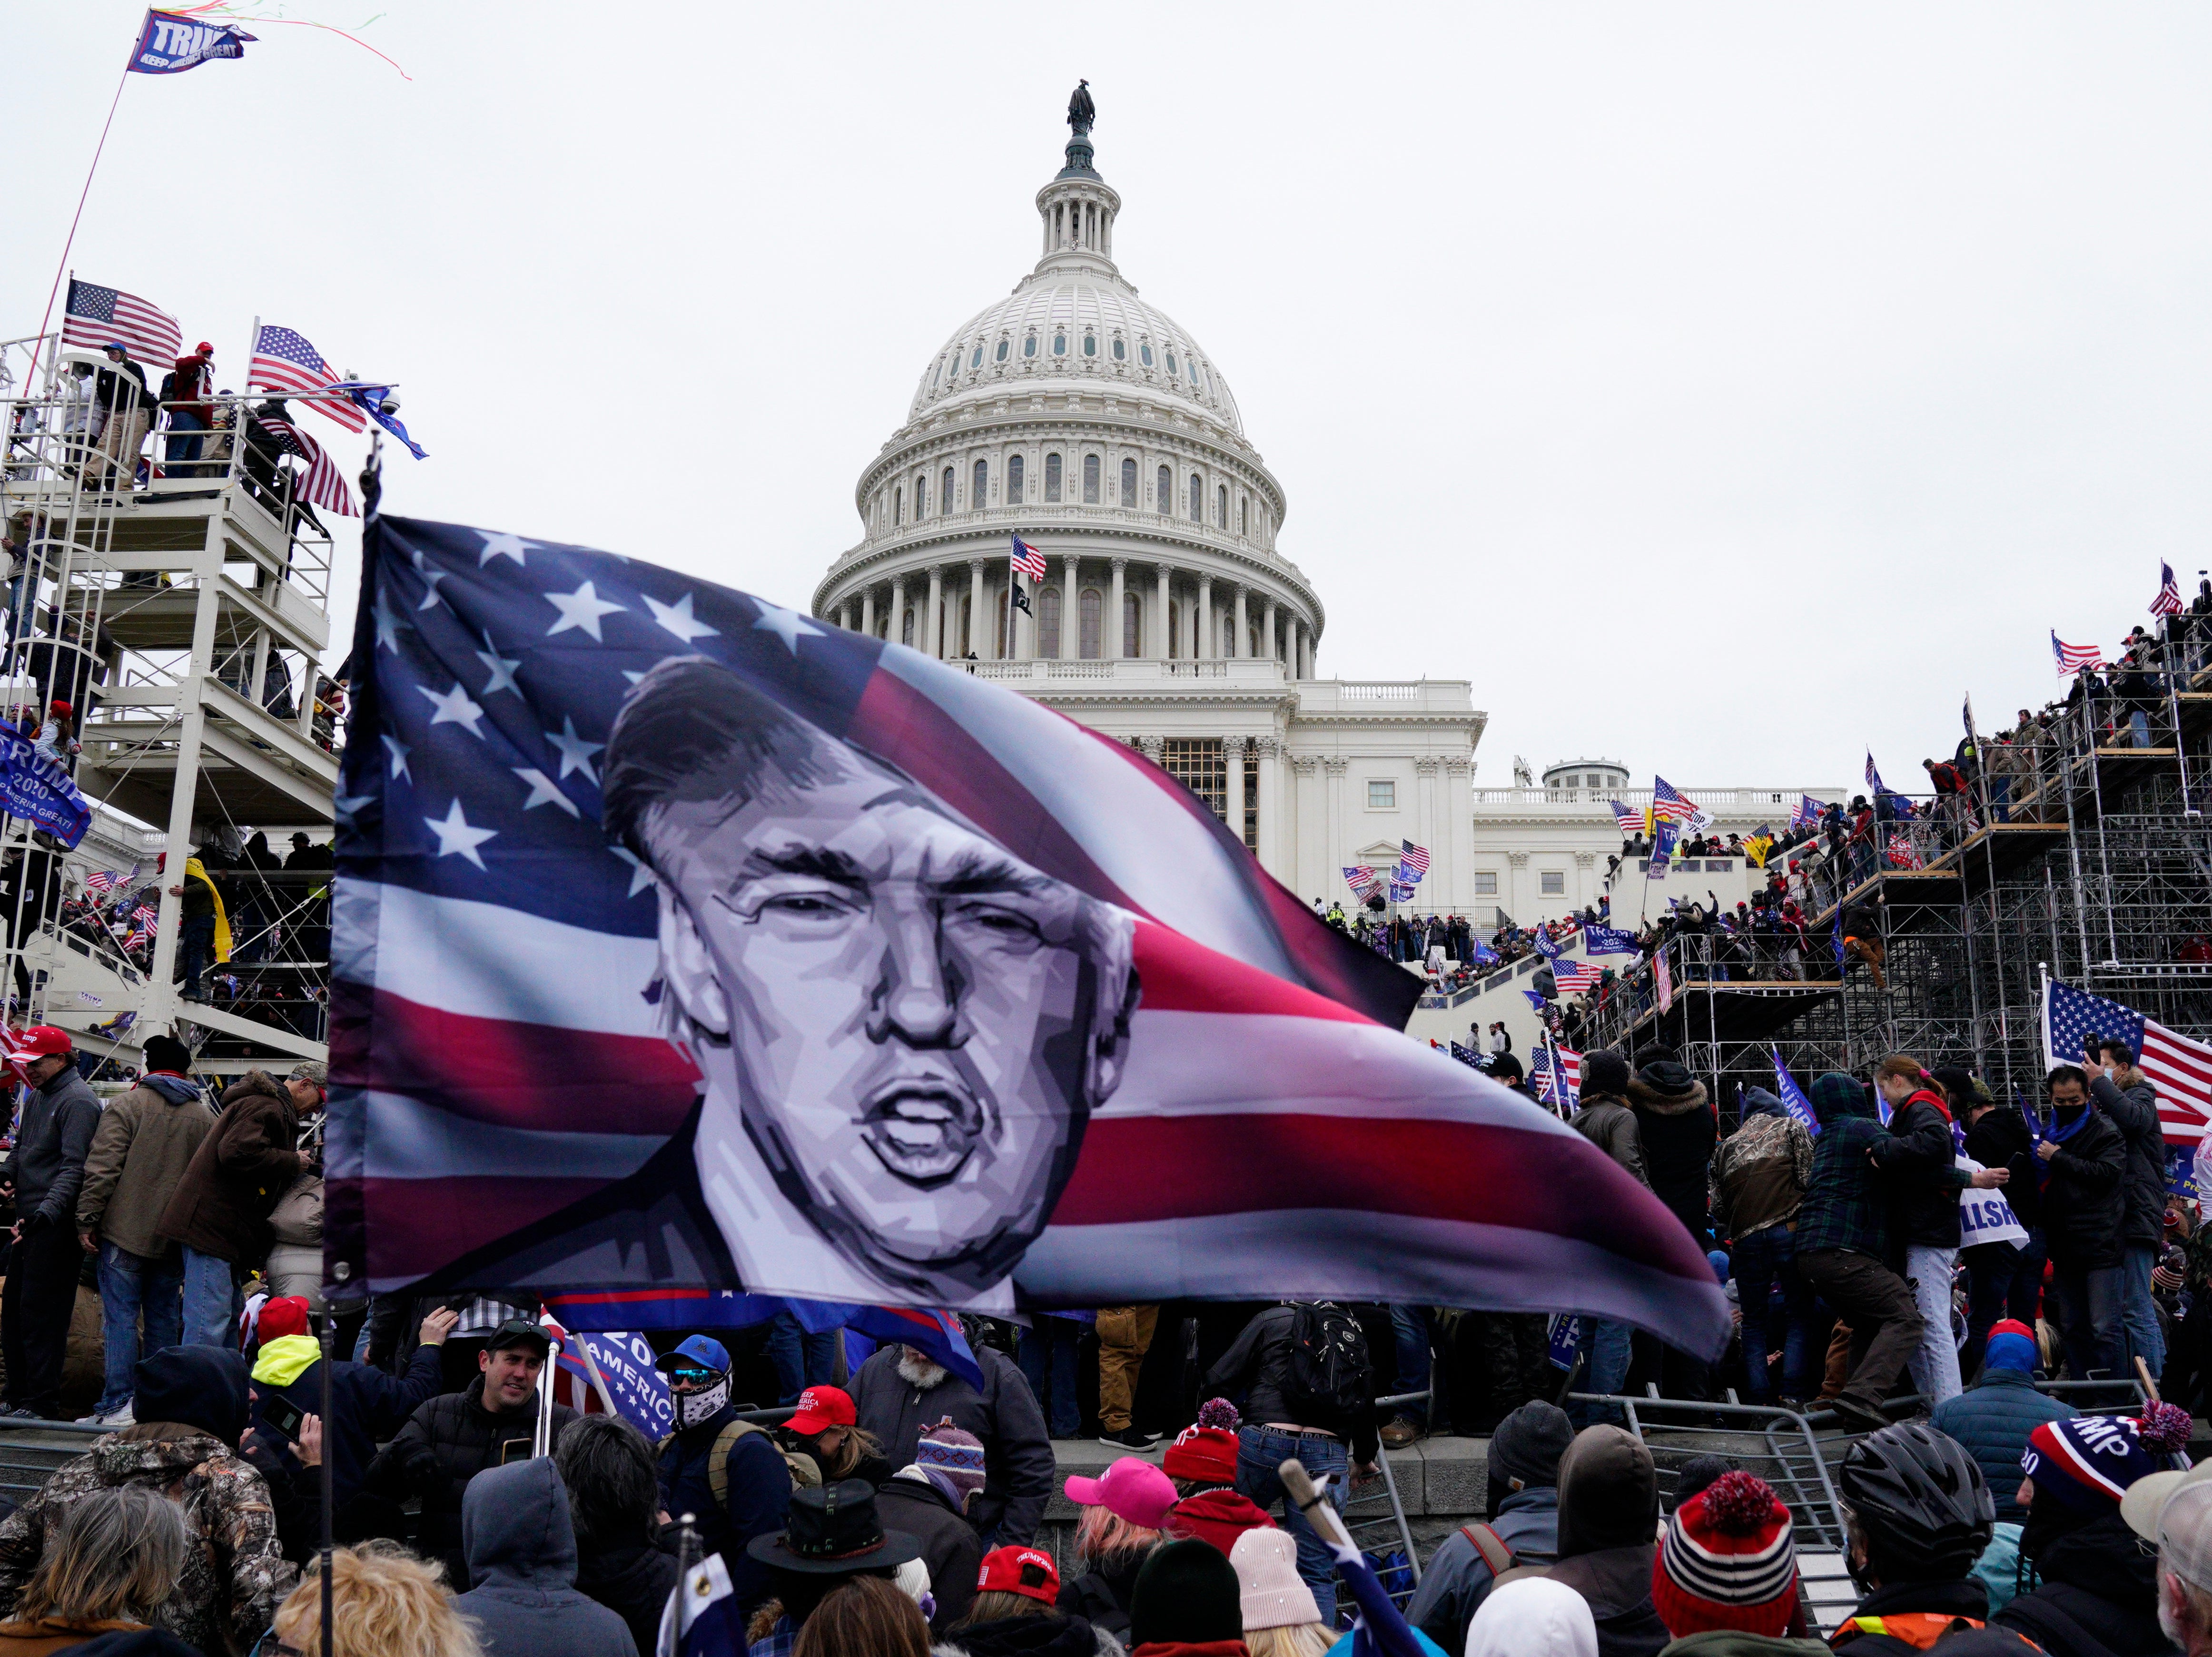 Supporters of Donald Trump storm the US Capitol on 6 January 2021